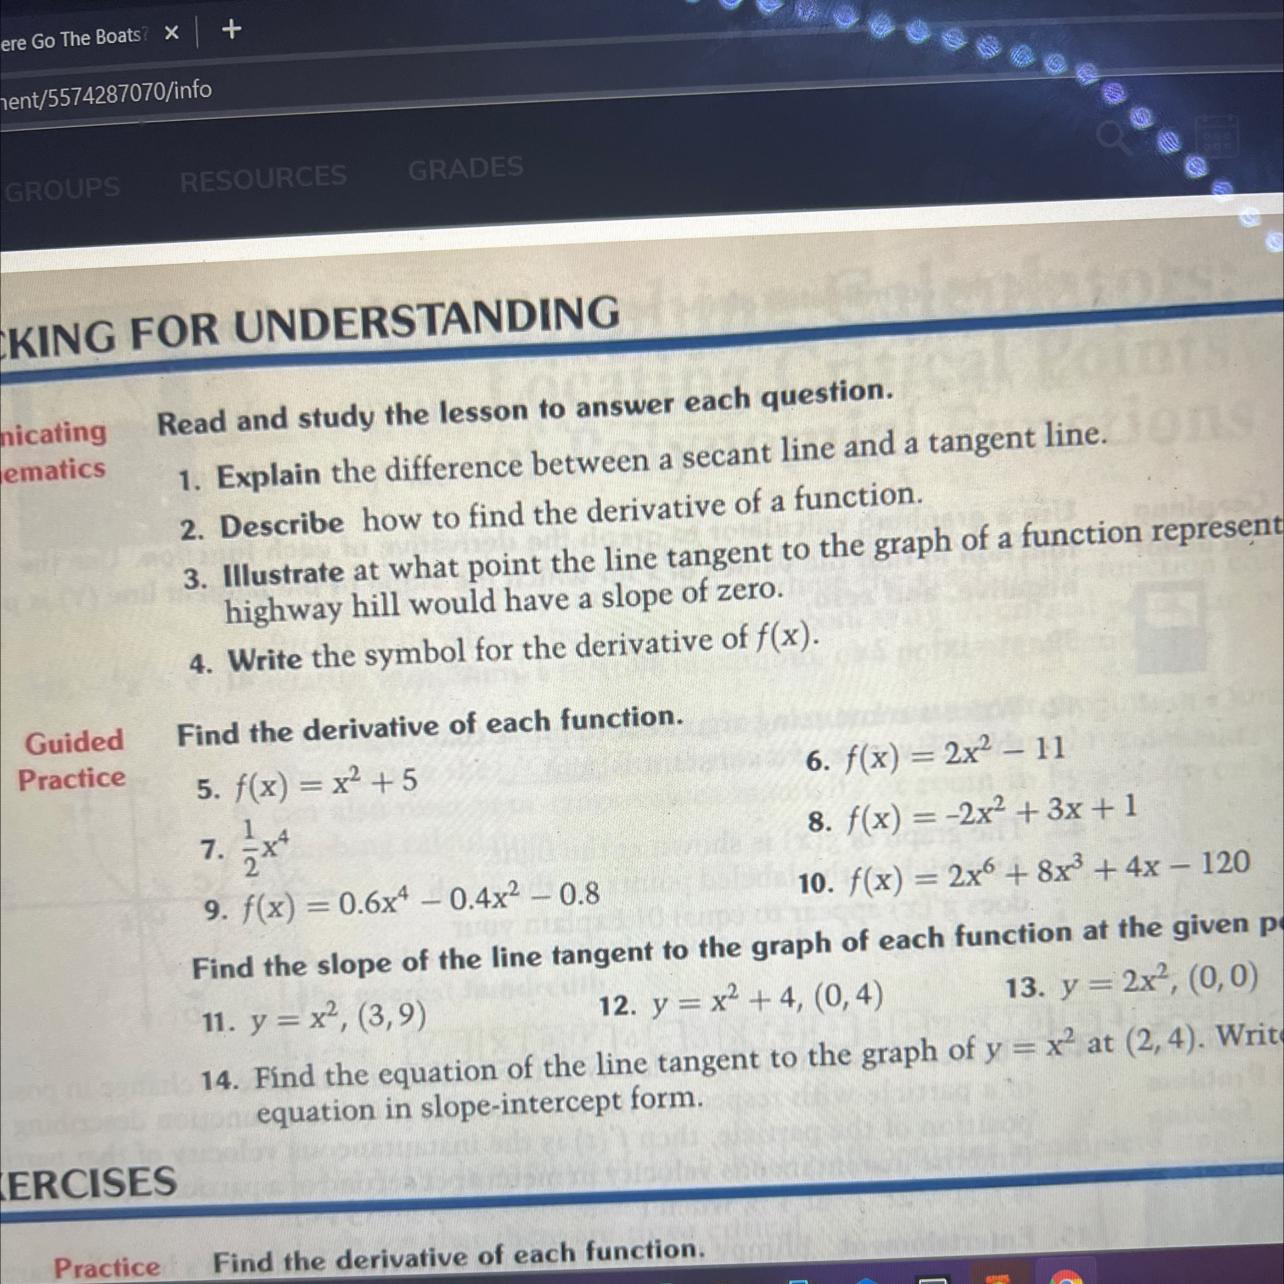 Really Need Help With 11 And 12 Just Started Learning This Today And I Don't Quite Understand It Would